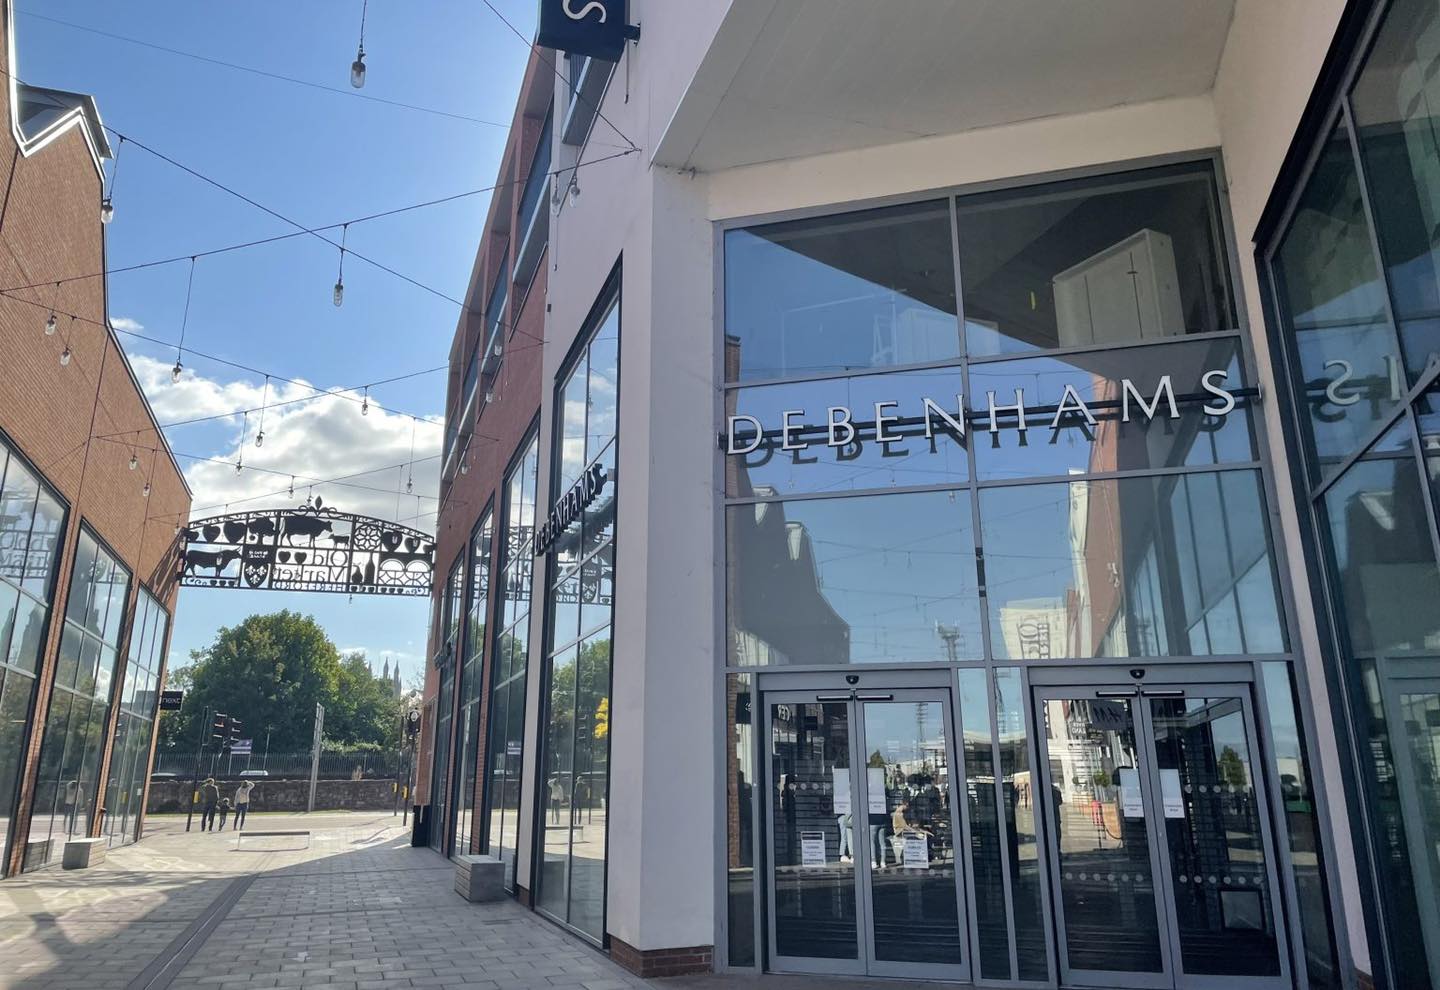 NEWS | Hereford’s empty Debenhams store at the Old Market could be set to be split into a mixture of retail space and office space by new tenant